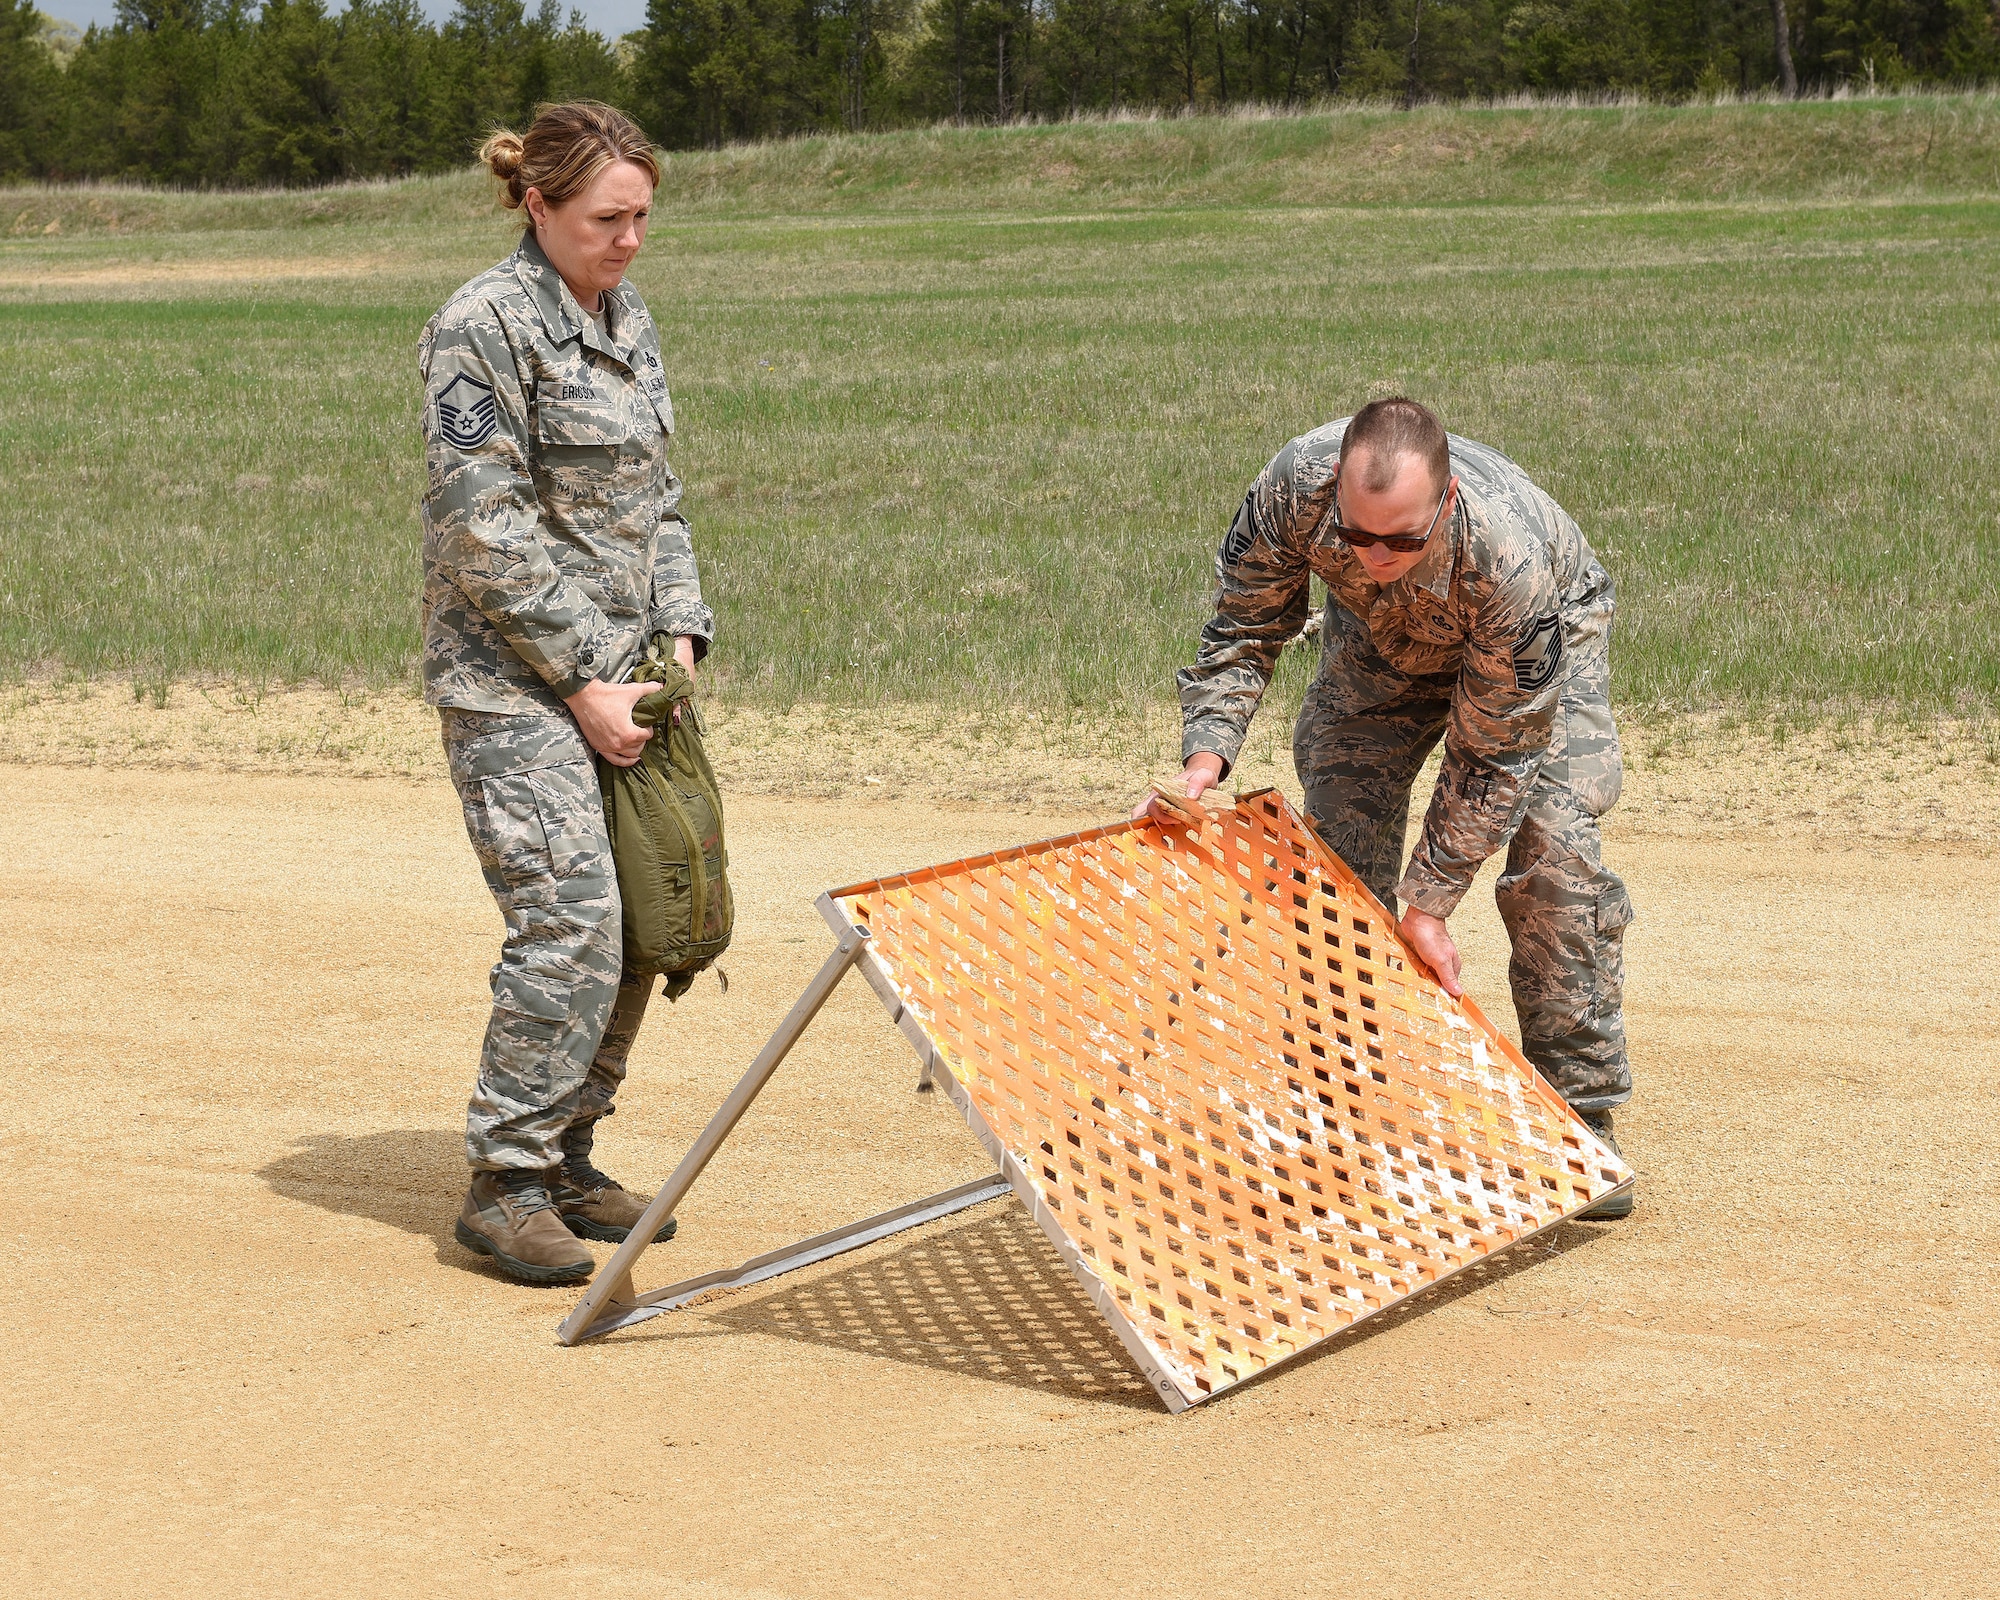 U.S. Air Force Master Sgt. Christina Ericson, left, and Senior Master Sgt. Brent Bixby, airfireld management specialists from the 182nd Airlift Wing, Illinois Air National Guard, establish the touchdown zone by placing orange assault panels along the edges of the dirt runway at Young Landing Zone located at Fort McCoy, Wis. May 14, 2018. A number of pilots were qualifying to complete their unimproved landing certification. (U.S. Air National Guard photo by Master Sgt. Todd A. Pendleton)